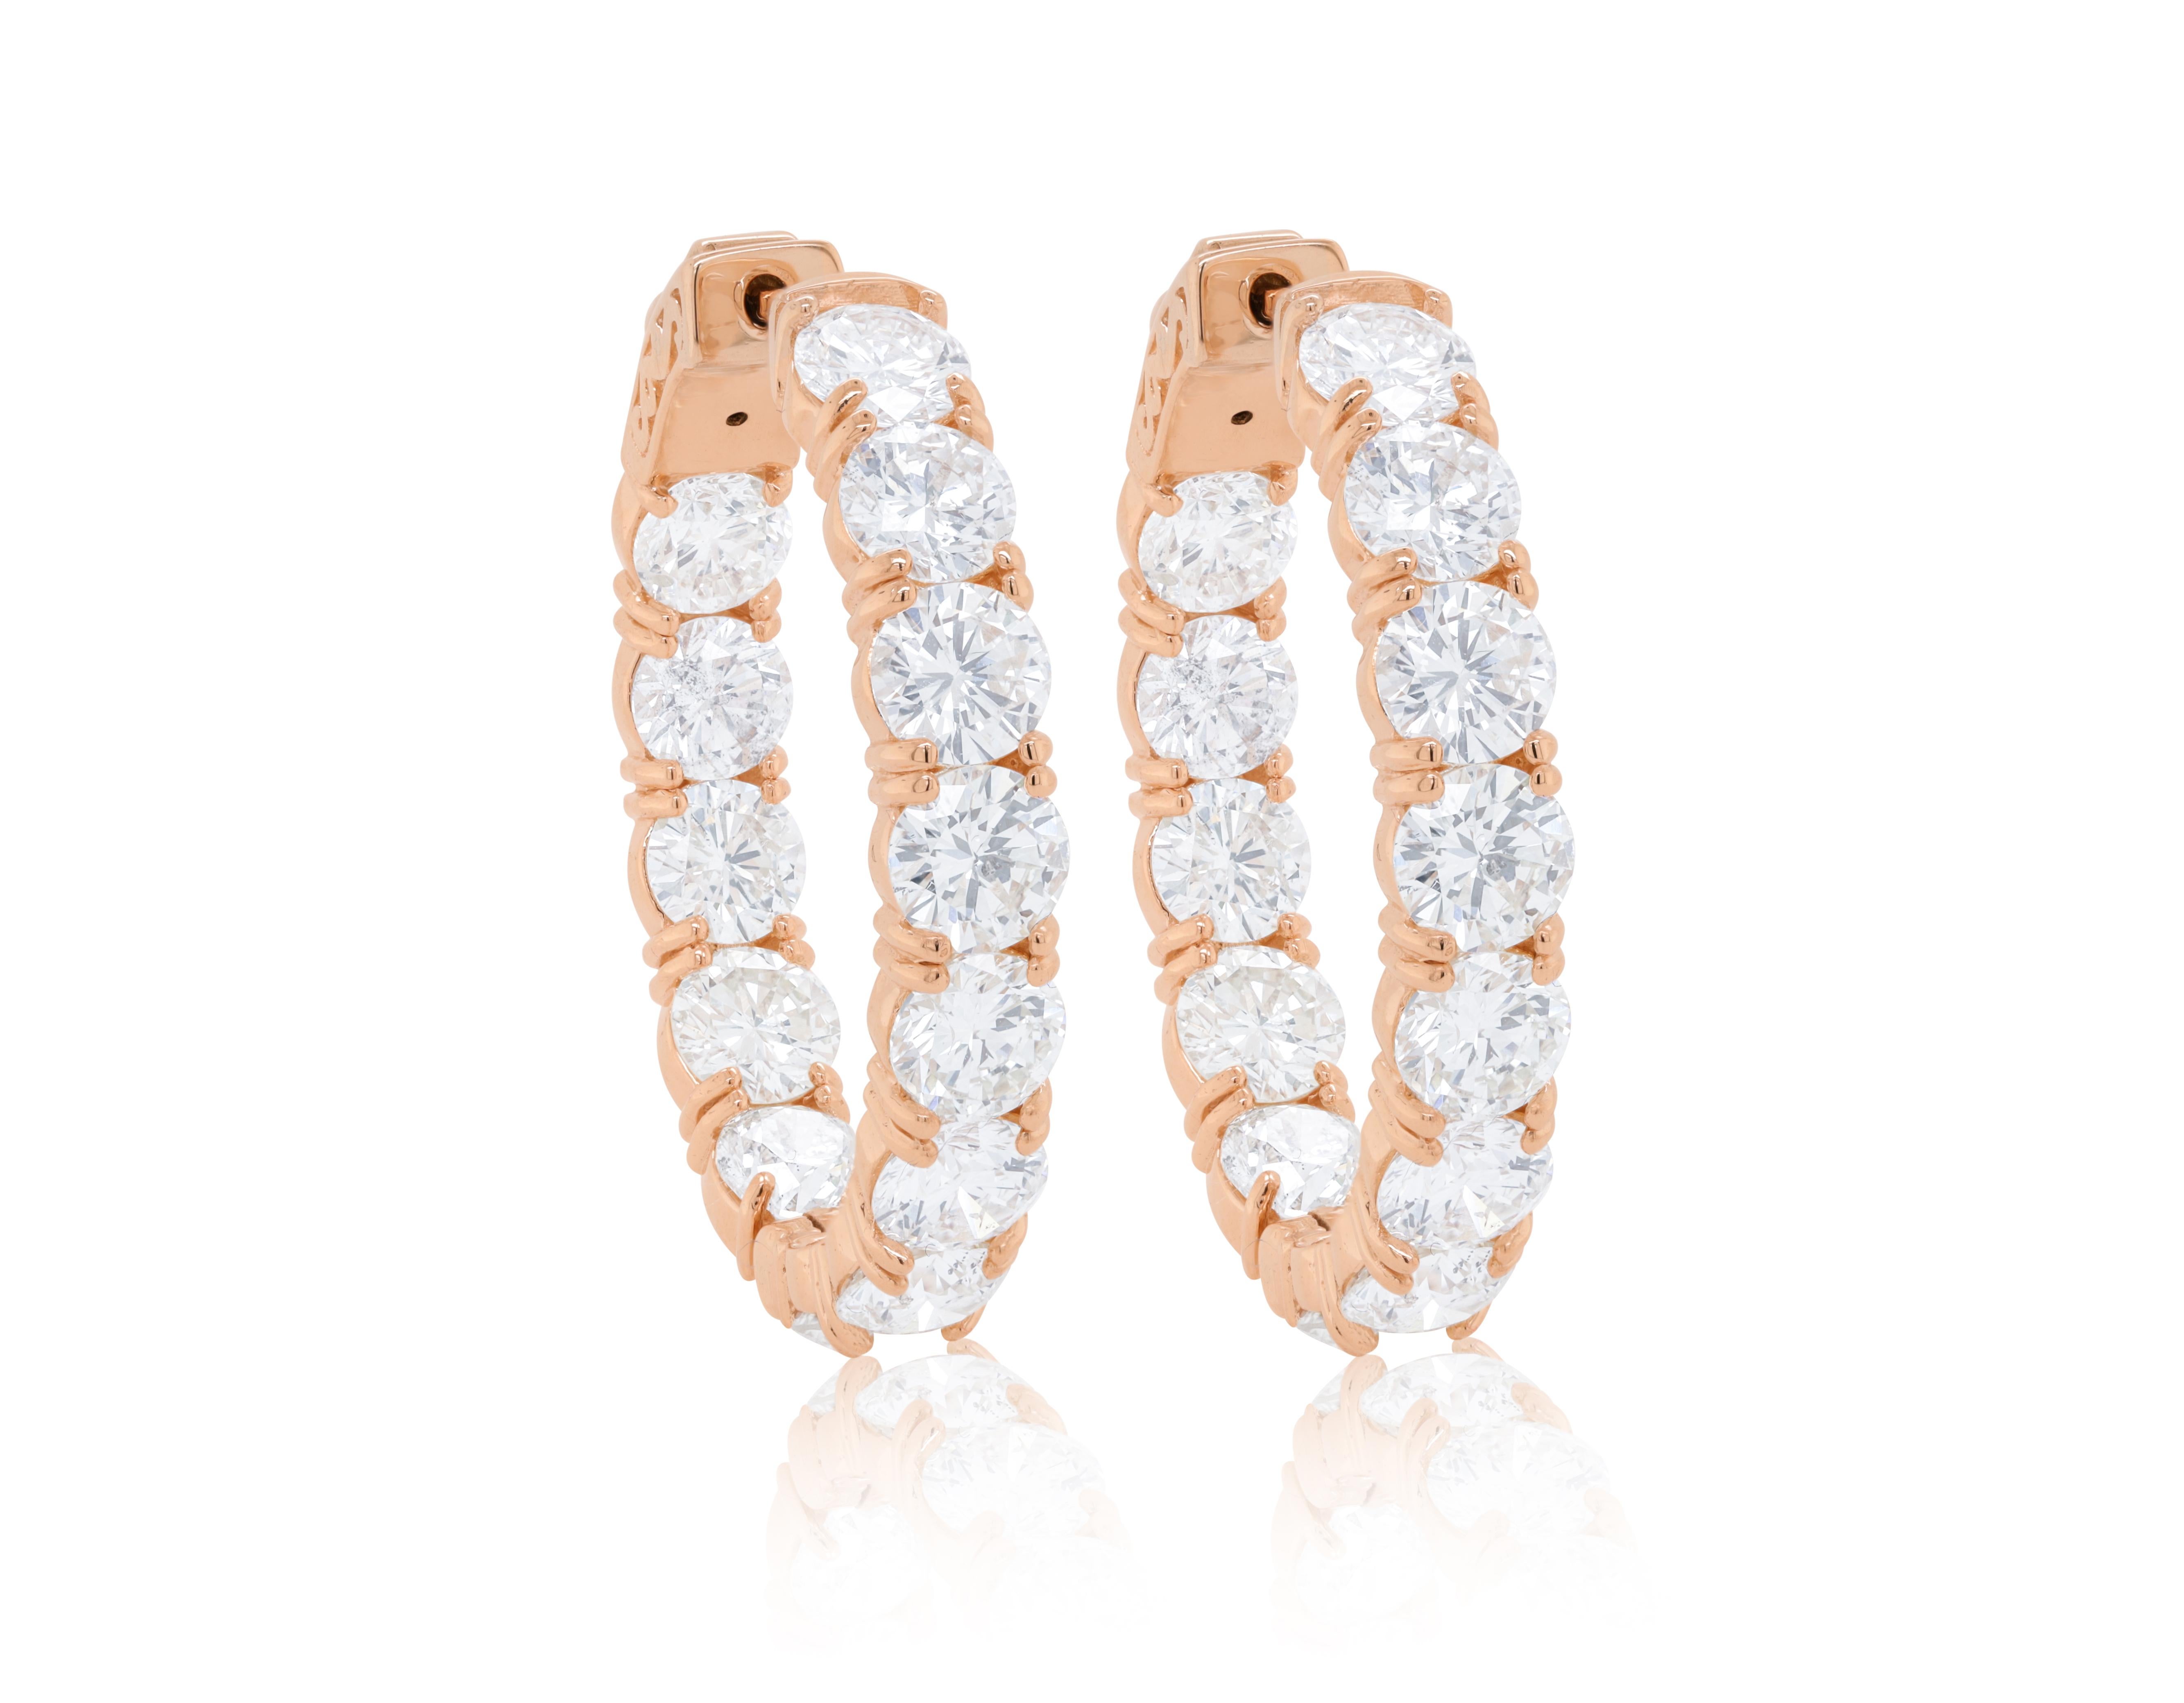 18 kt rose gold inside-out hoop earrings adorned with 9.50 cts tw of round diamonds (32 stones)
Diana M. is a leading supplier of top-quality fine jewelry for over 35 years.
Diana M is one-stop shop for all your jewelry shopping, carrying line of